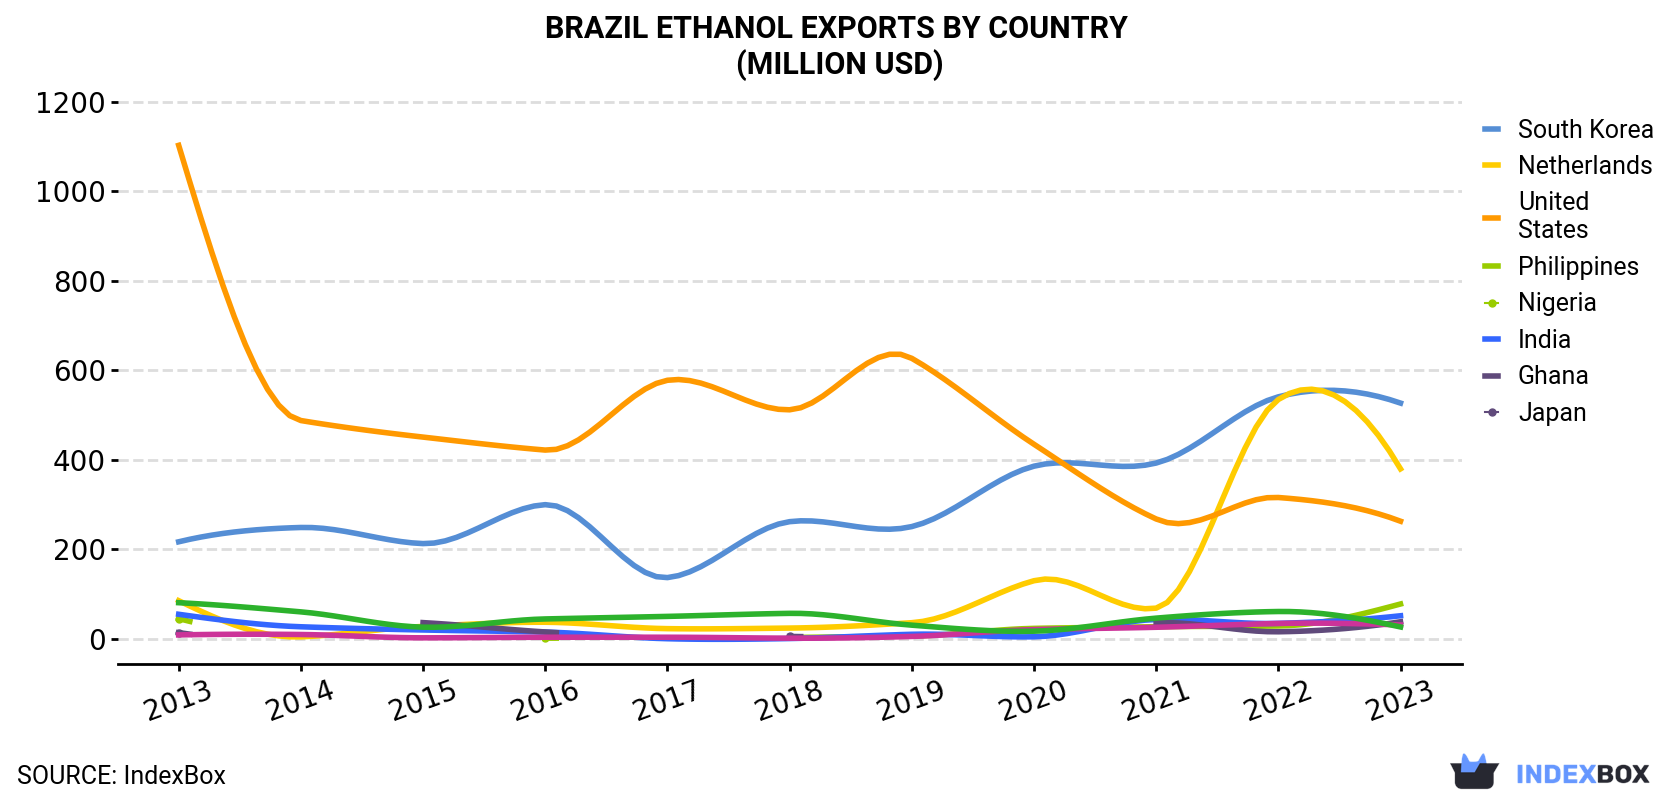 Brazil Ethanol Exports By Country (Million USD)